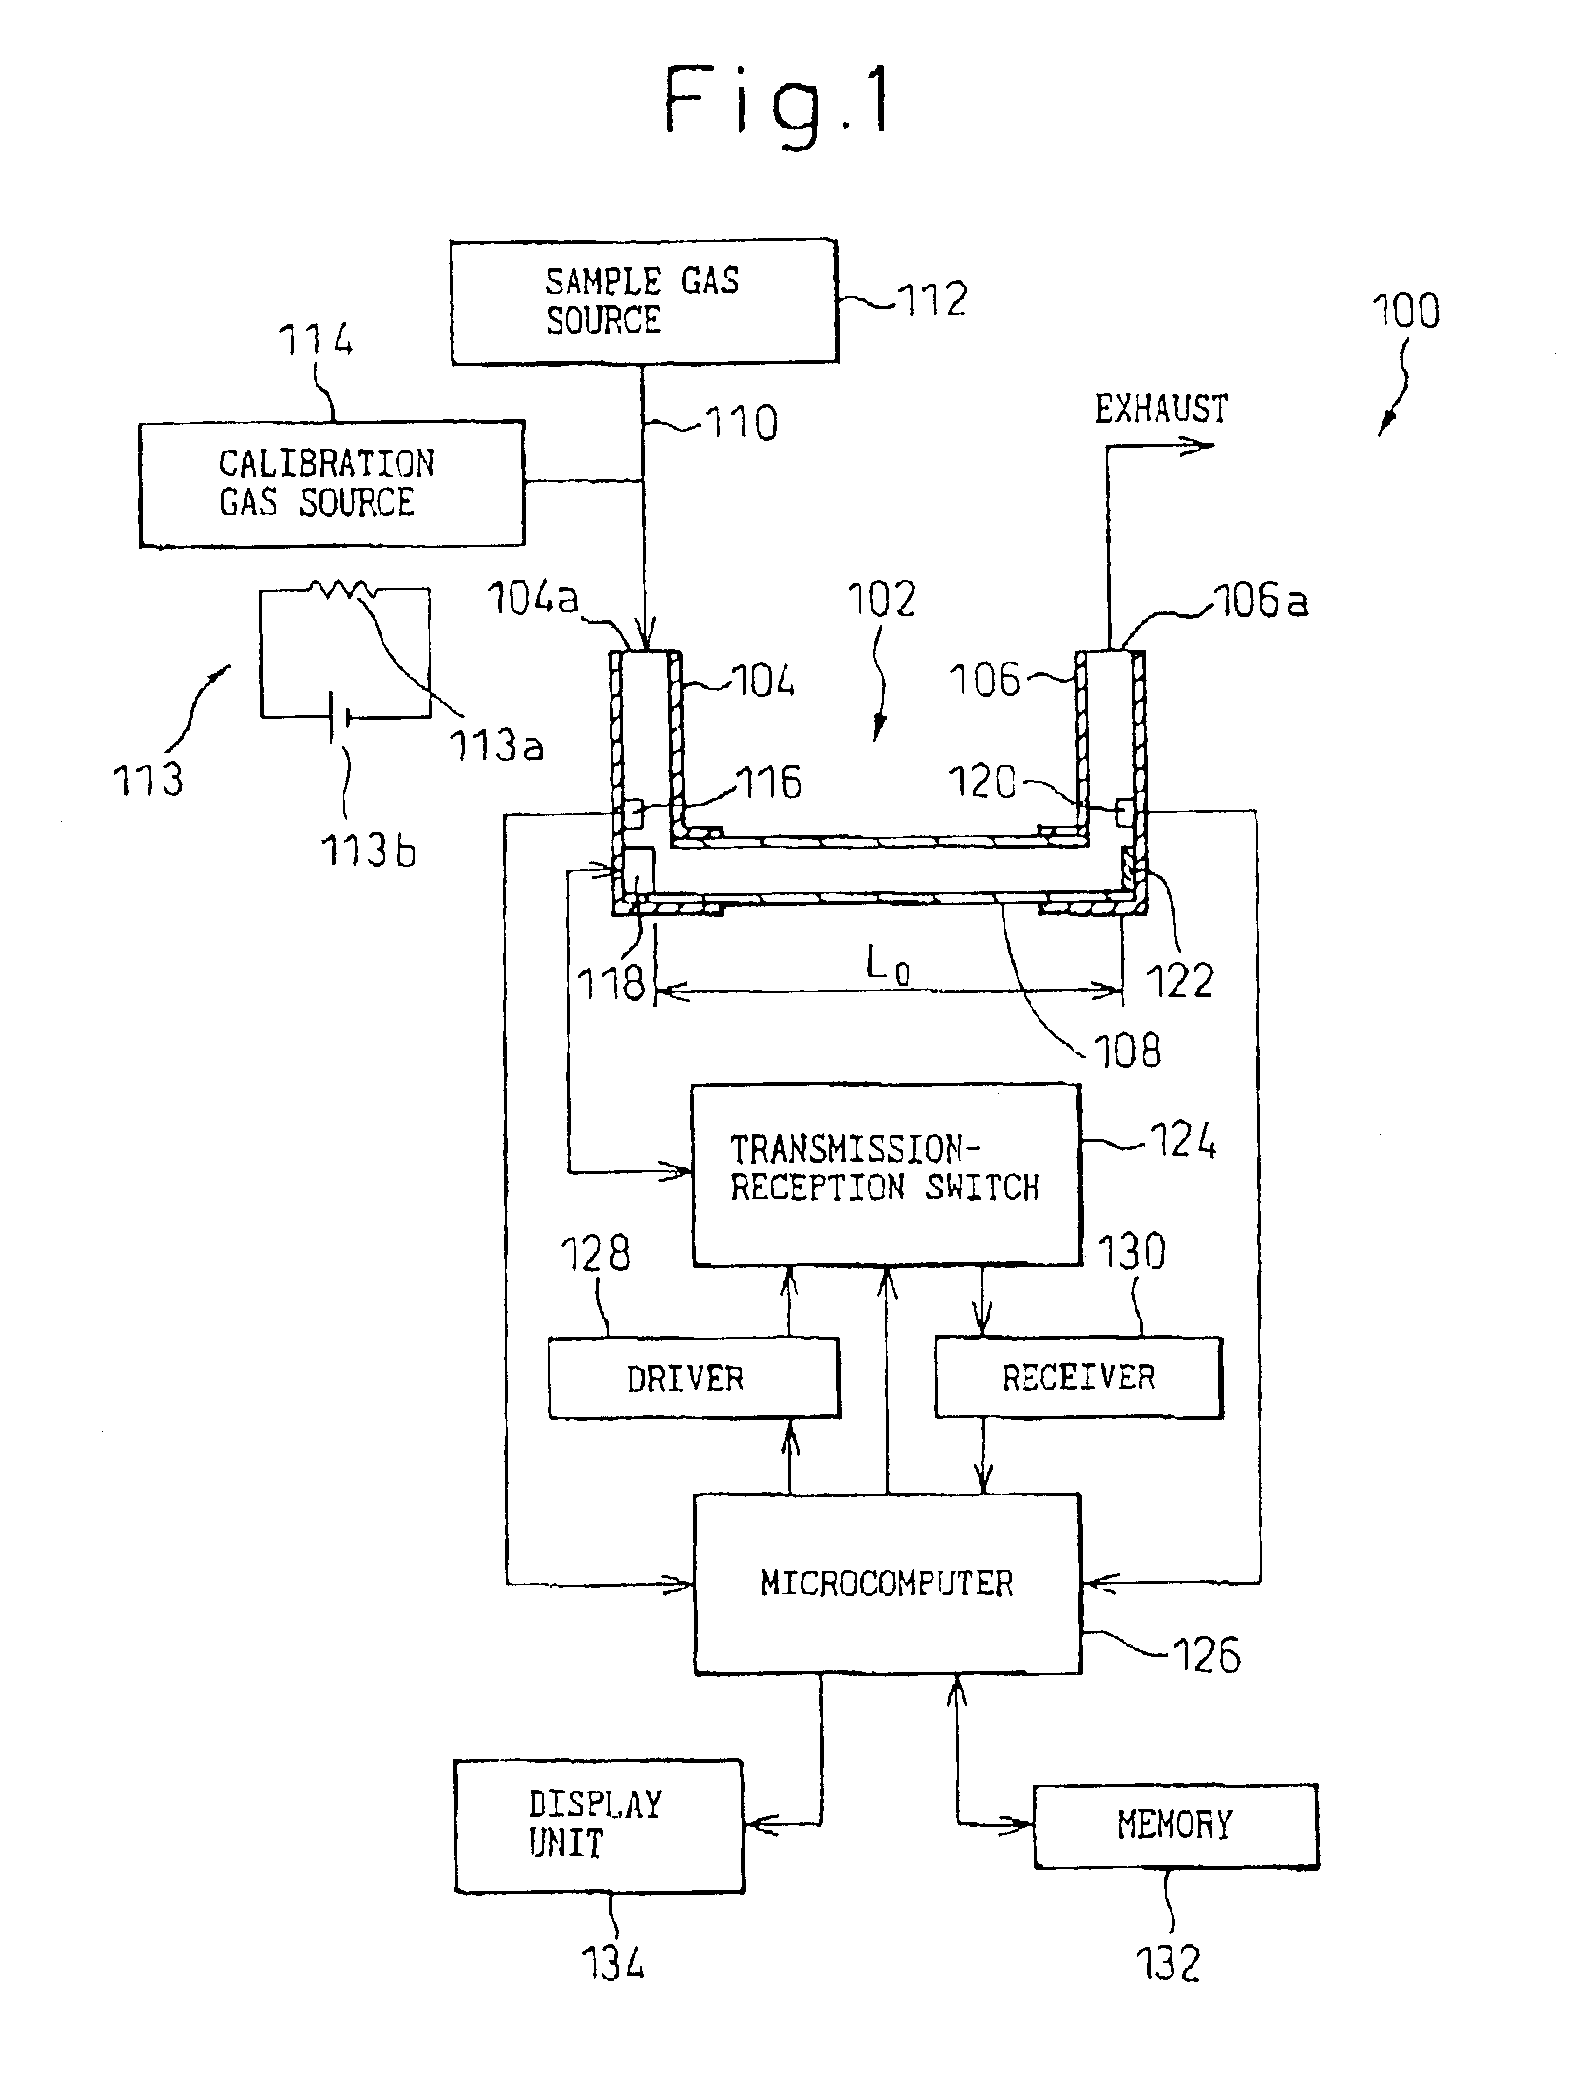 Ultrasonic apparatus and method for measuring the concentration and flow rate of gas